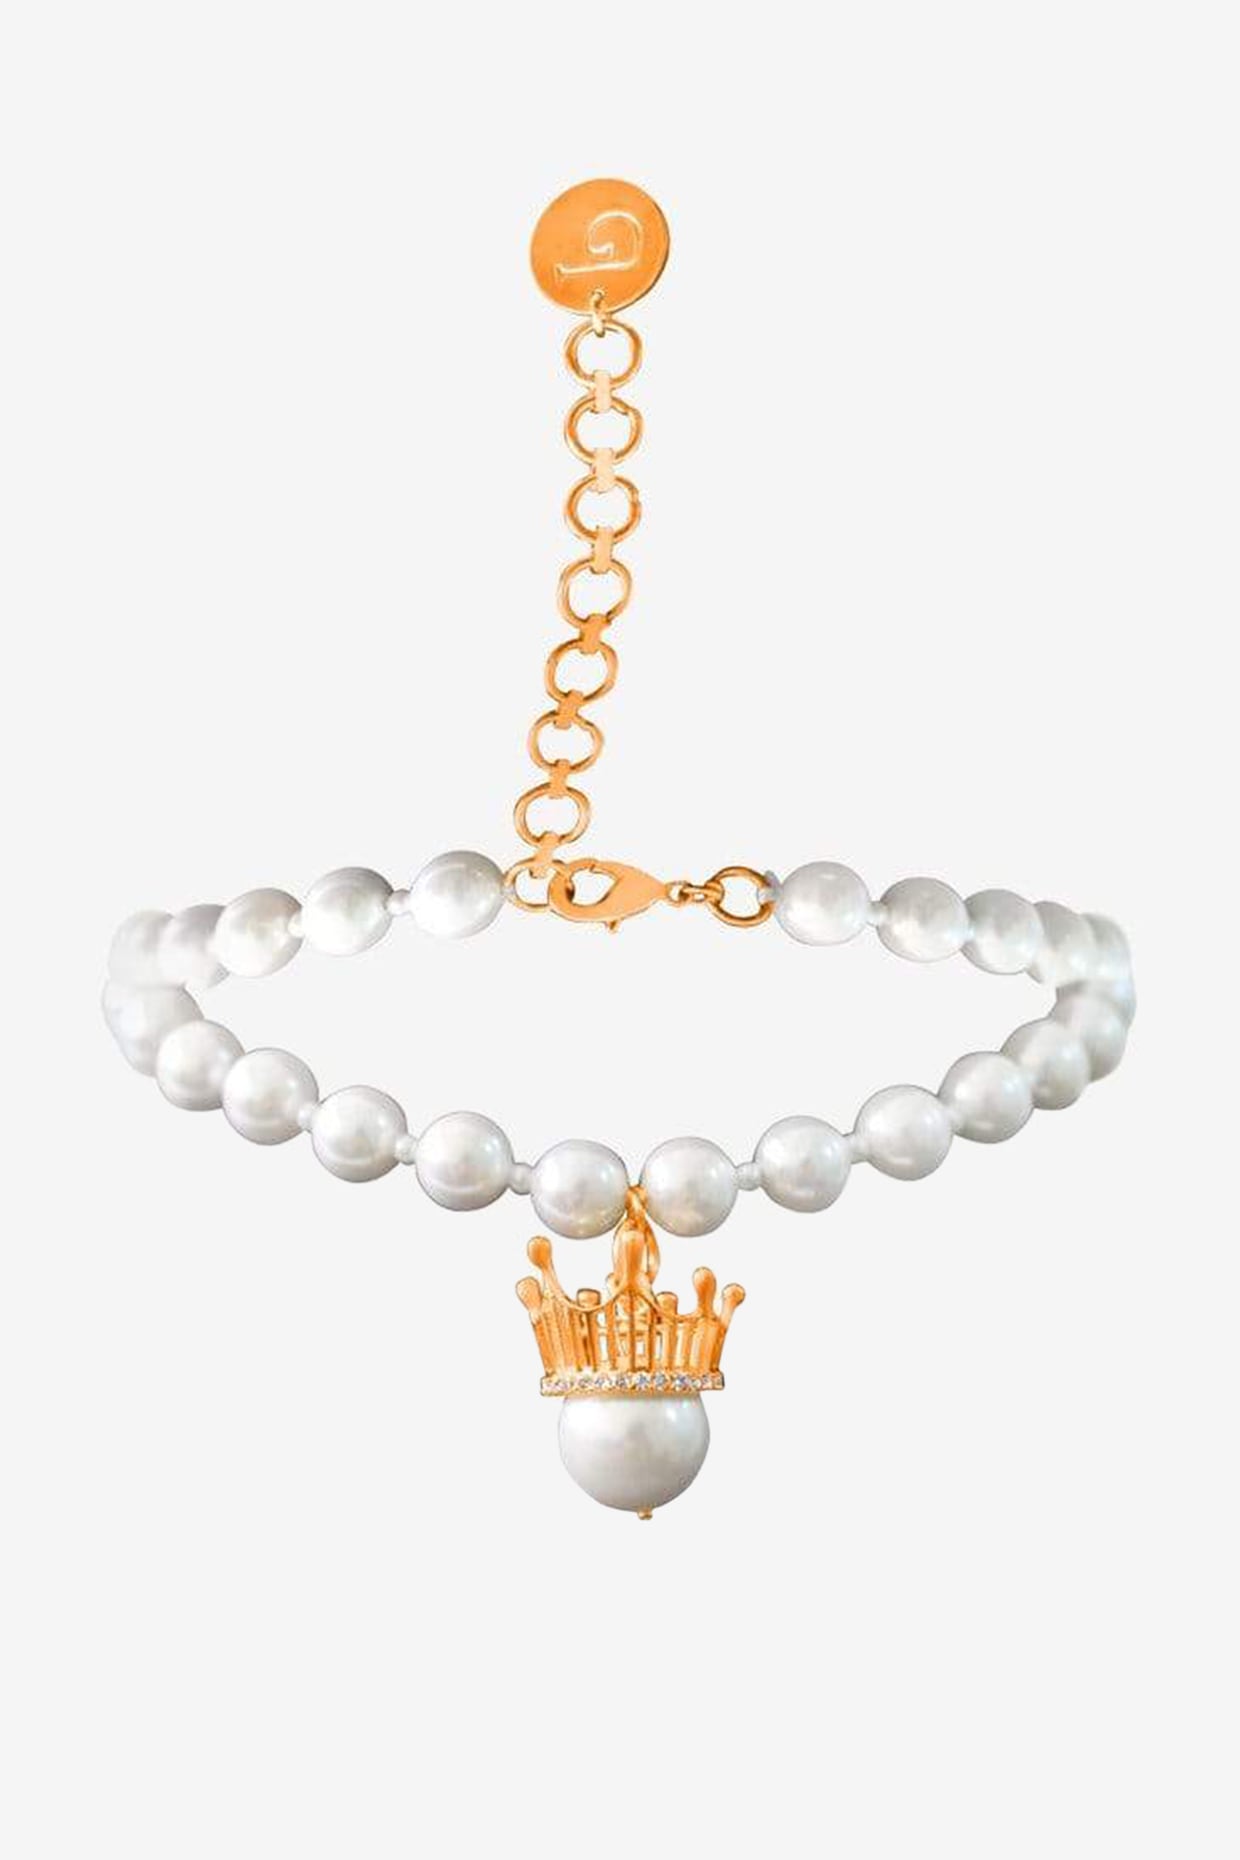 Buy Rose Gold Bracelet With Semi-Precious Carved Beads, Swarovski Crystals  And Delicate Pearl Accents By Prerto KALKI Fashion India